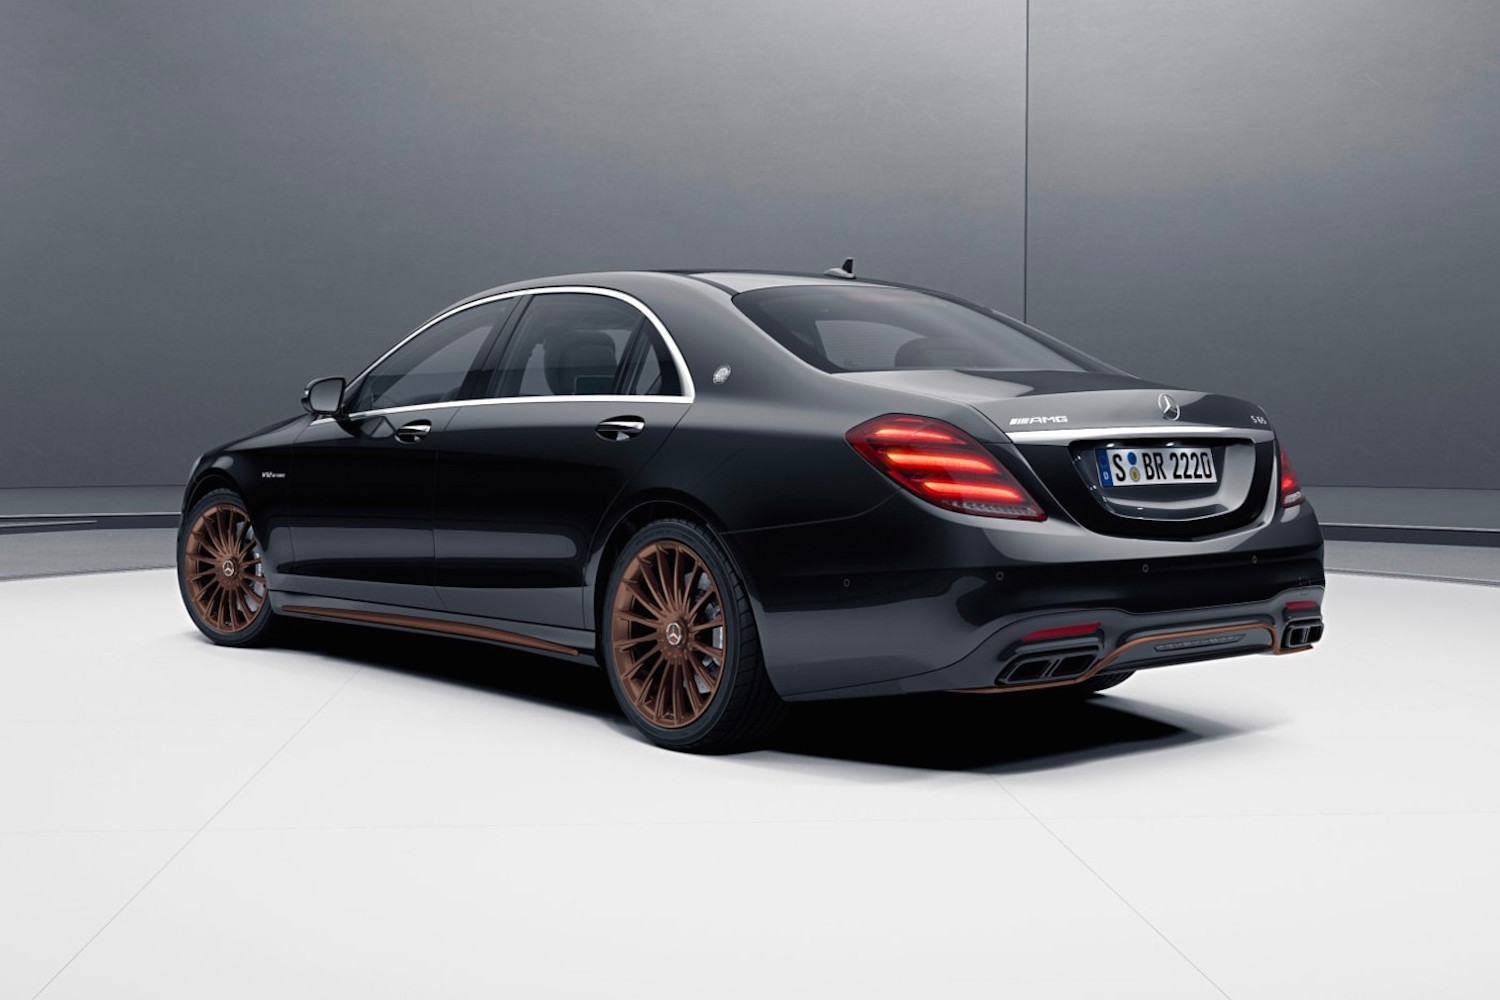 mercedes amg s 65 final edition Mercedes-AMG S 65 Final Edition